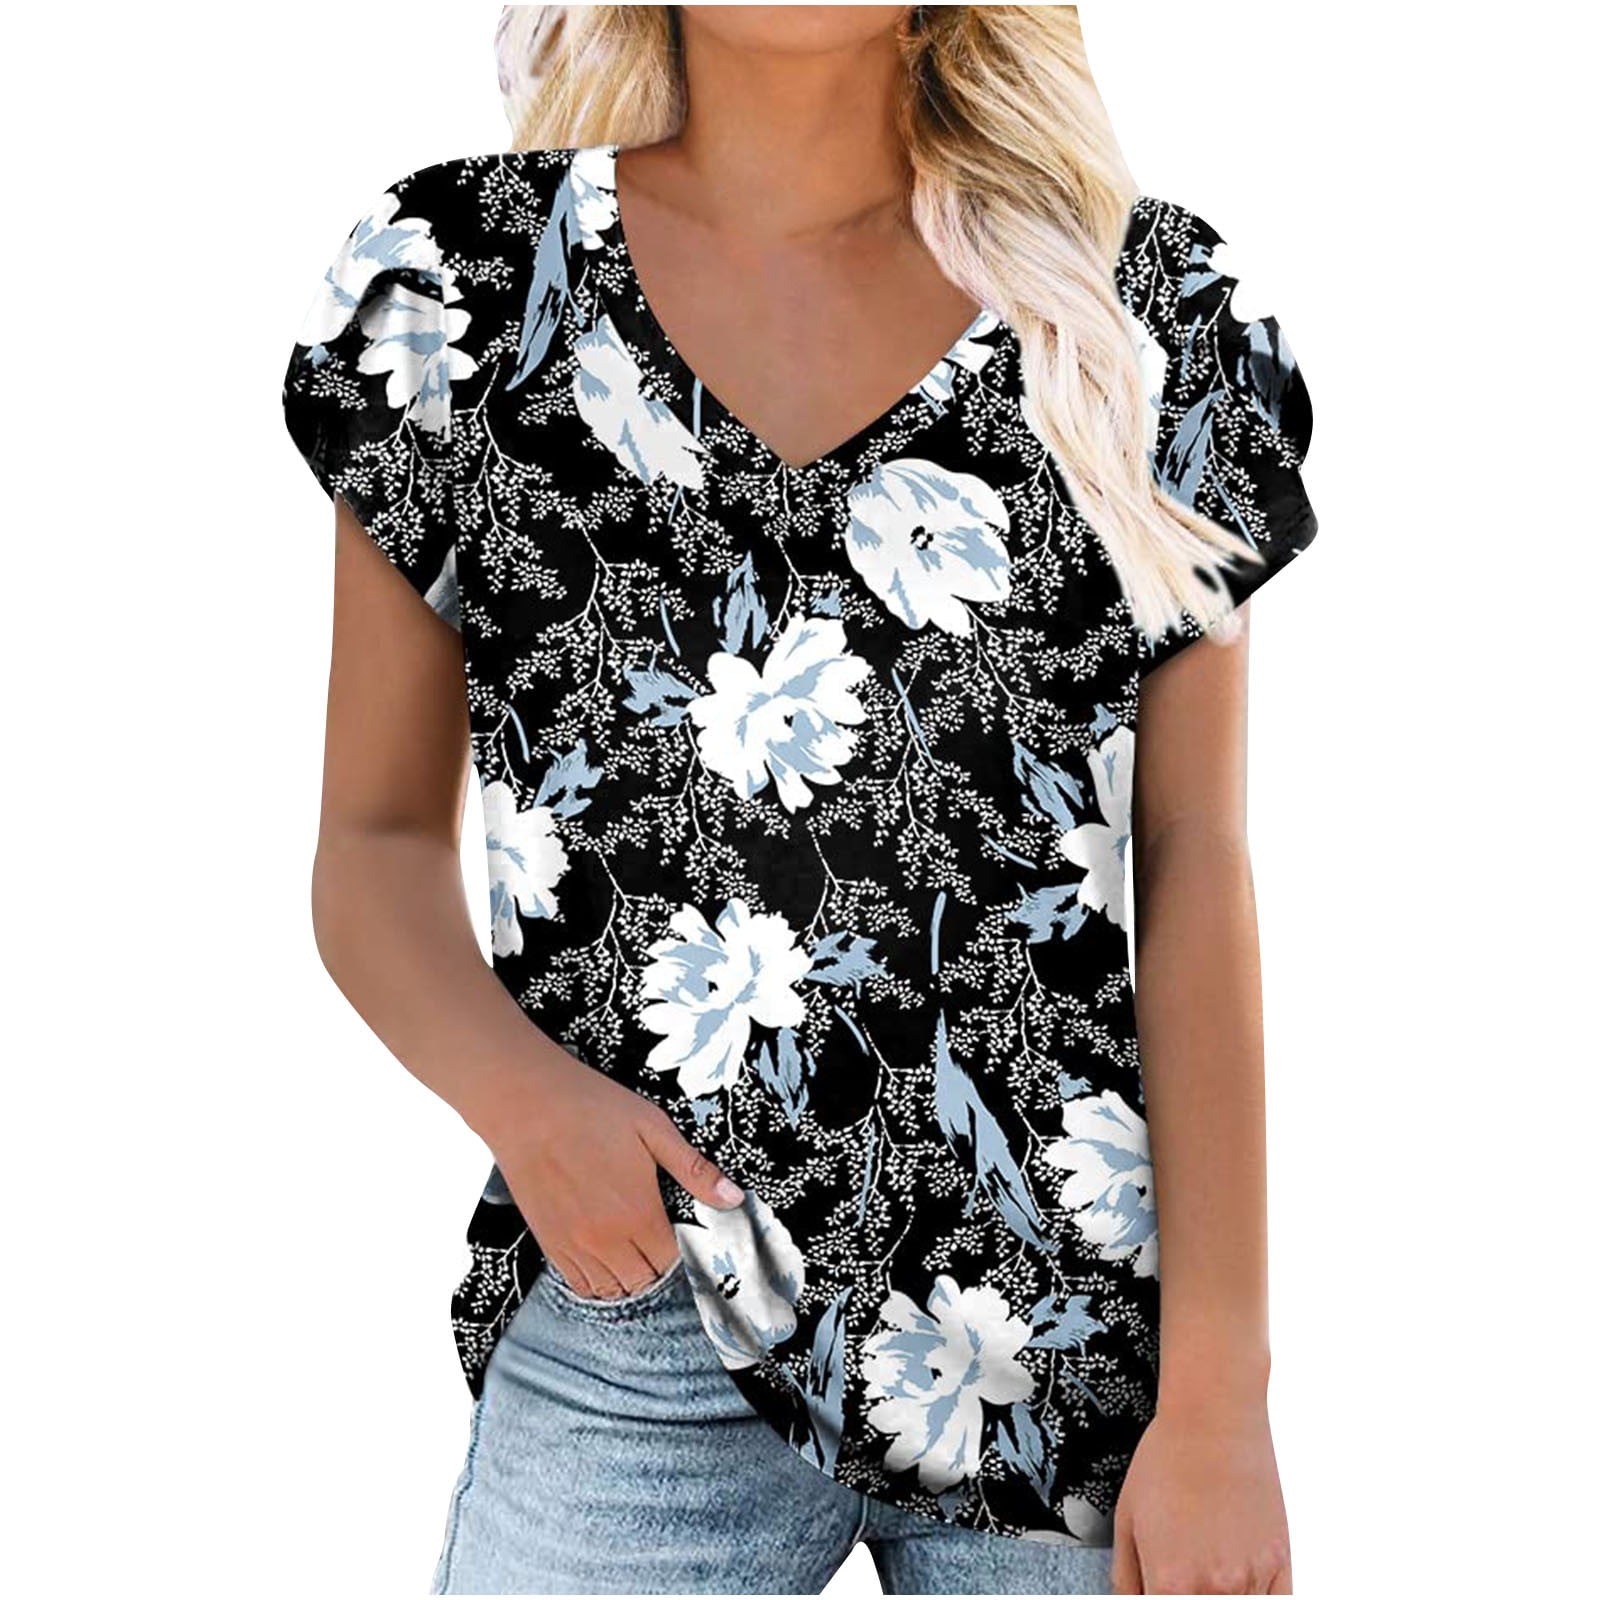 Blouses for Women Fashion Oversized Shirts for Women,Women Floral Print Blouse Short Sleeve Shirts Collar Y3k Top Blusas Para Mujer Casuales Y Elegantes Walmart.com